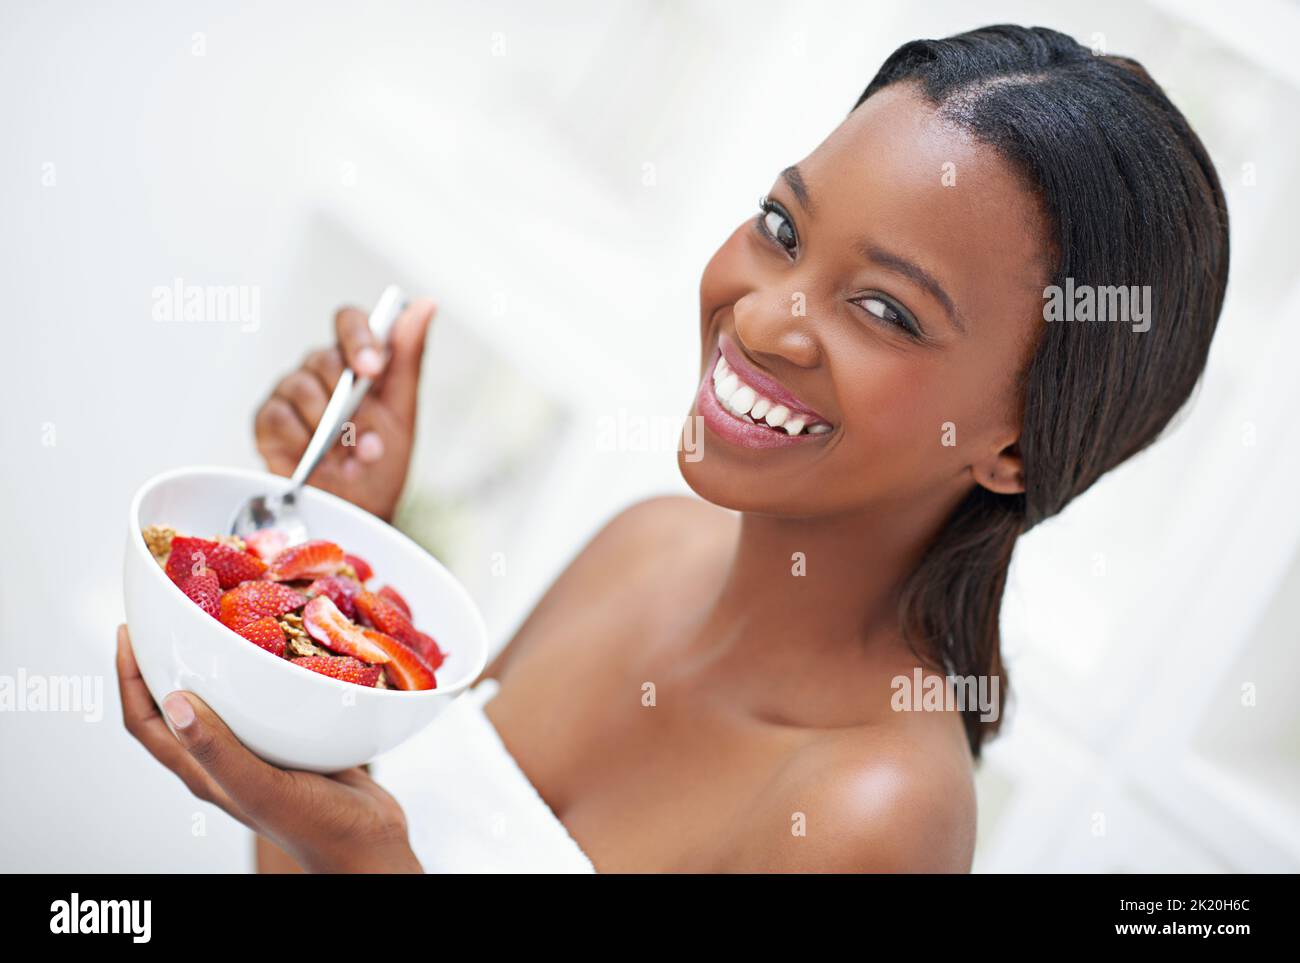 Im starting my morning the strawberry way. a beautiful young woman eating a bowl of strawberriesff. Stock Photo